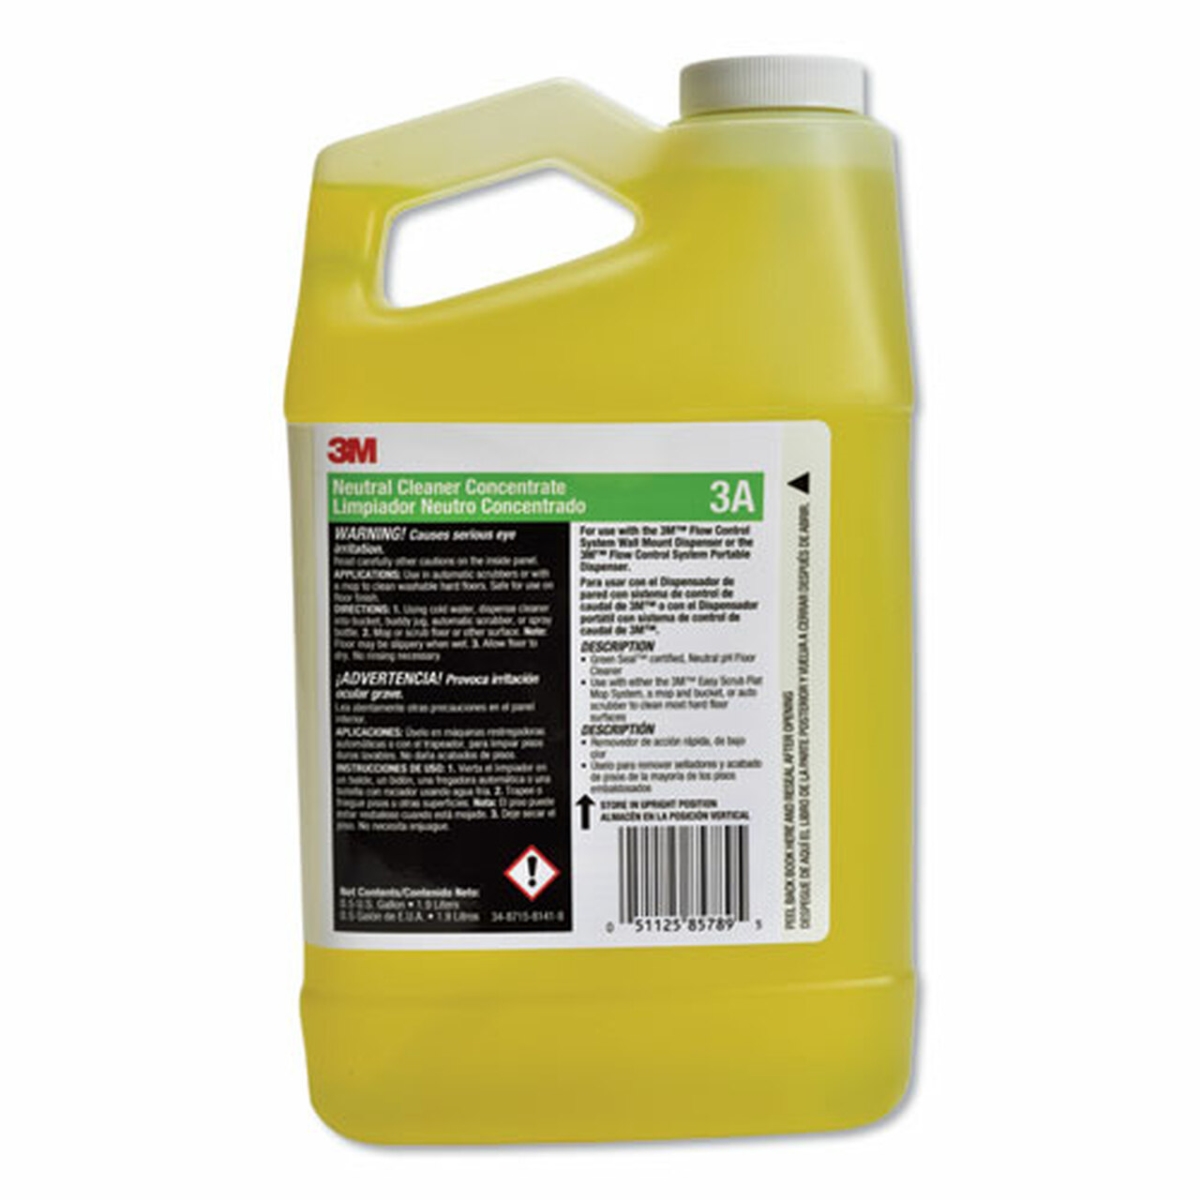 Picture of 3M 3A 0.5 gal Low-Foaming Neutral Cleaner Concentrate